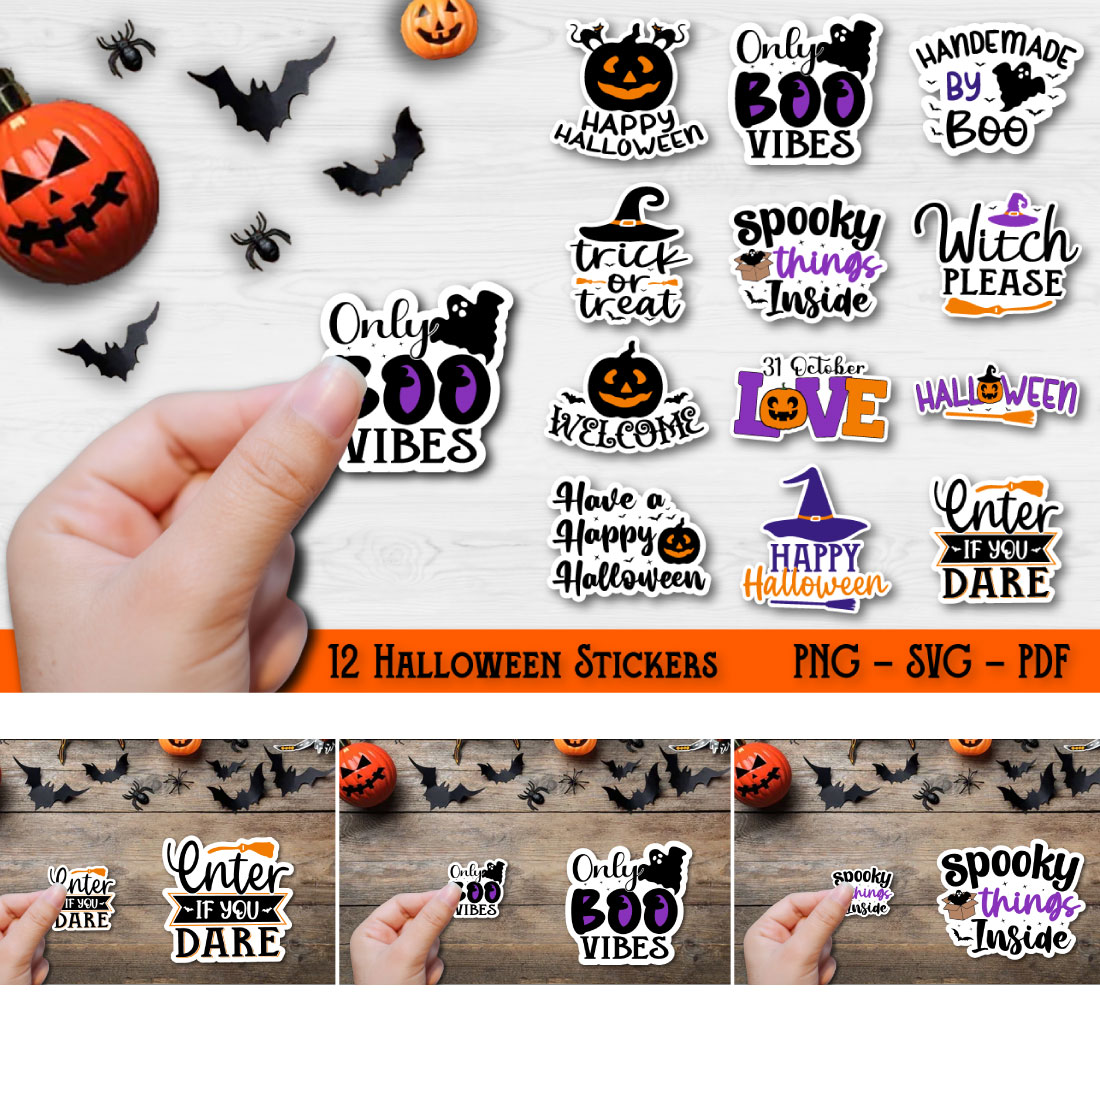 Halloween Sticker Bundle 12 Stickers cover image.